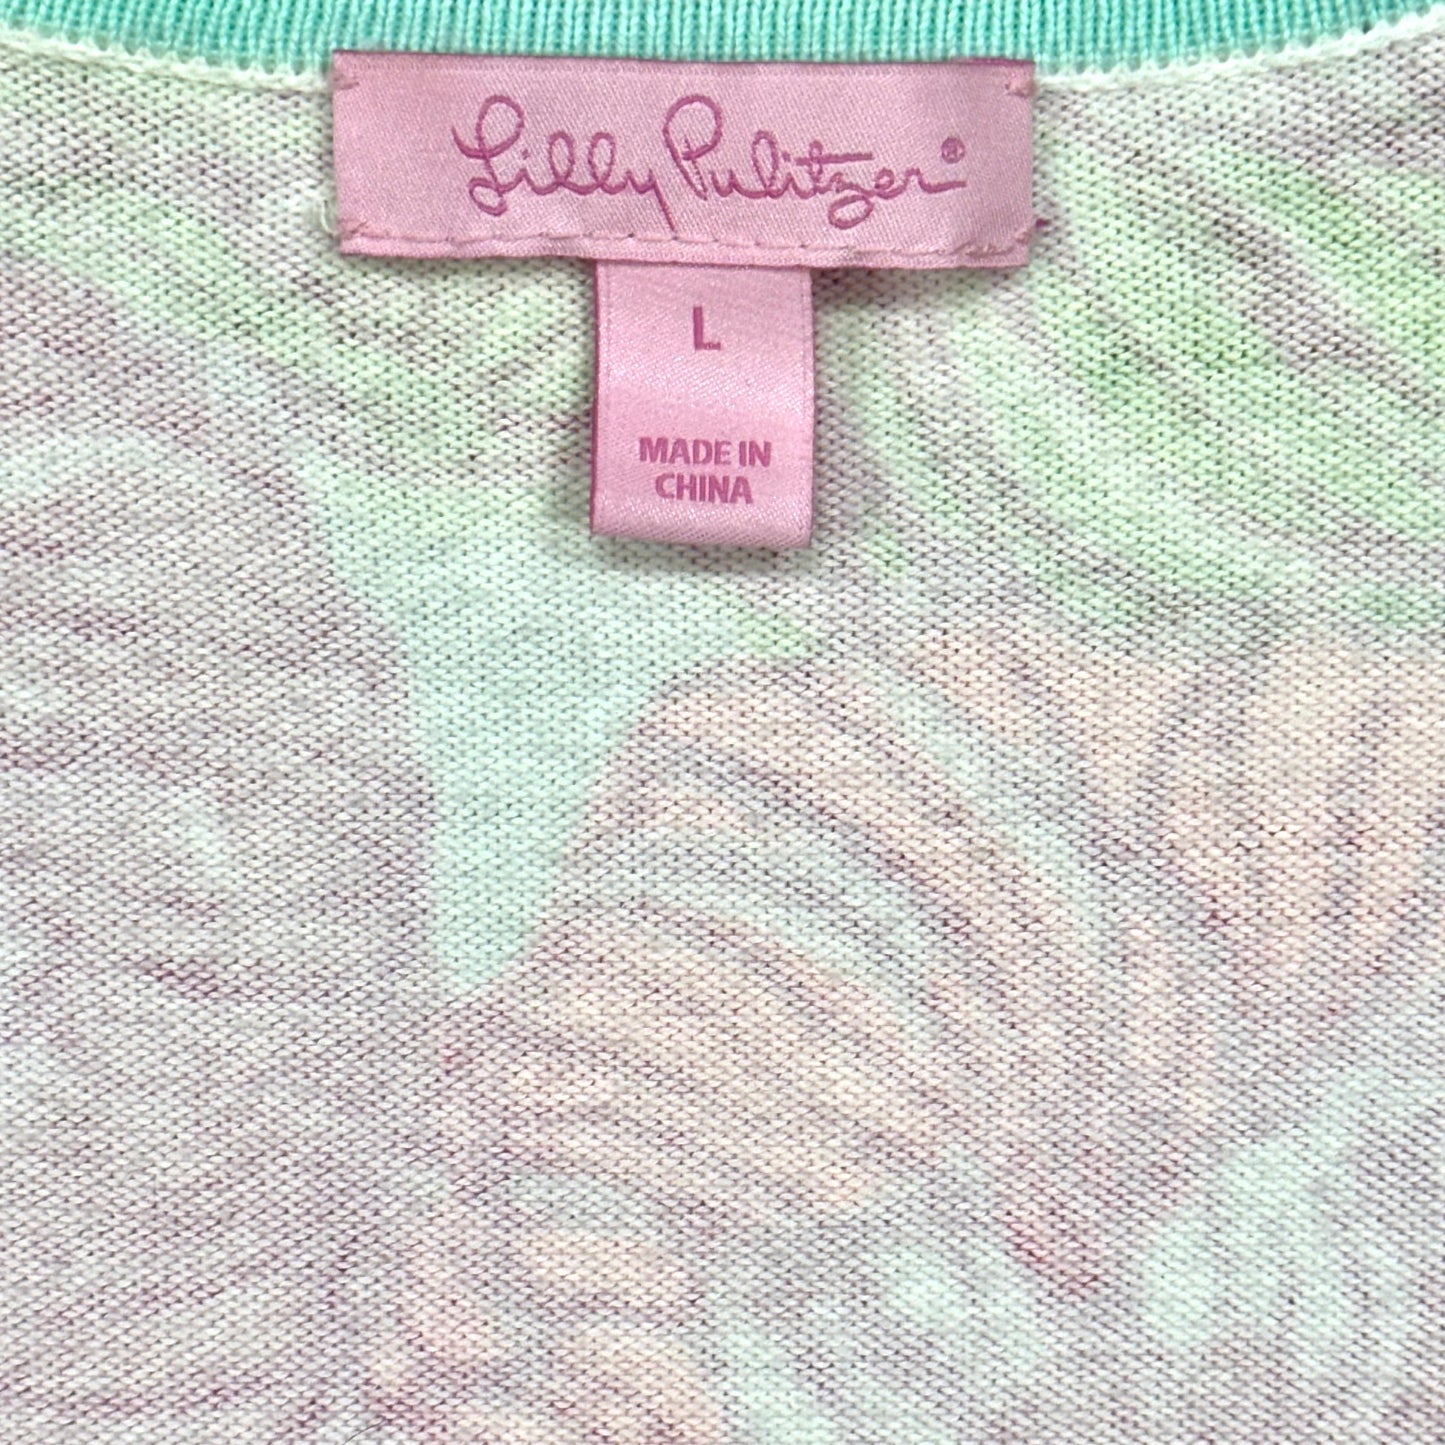 Sweater Designer By Lilly Pulitzer  Size: L